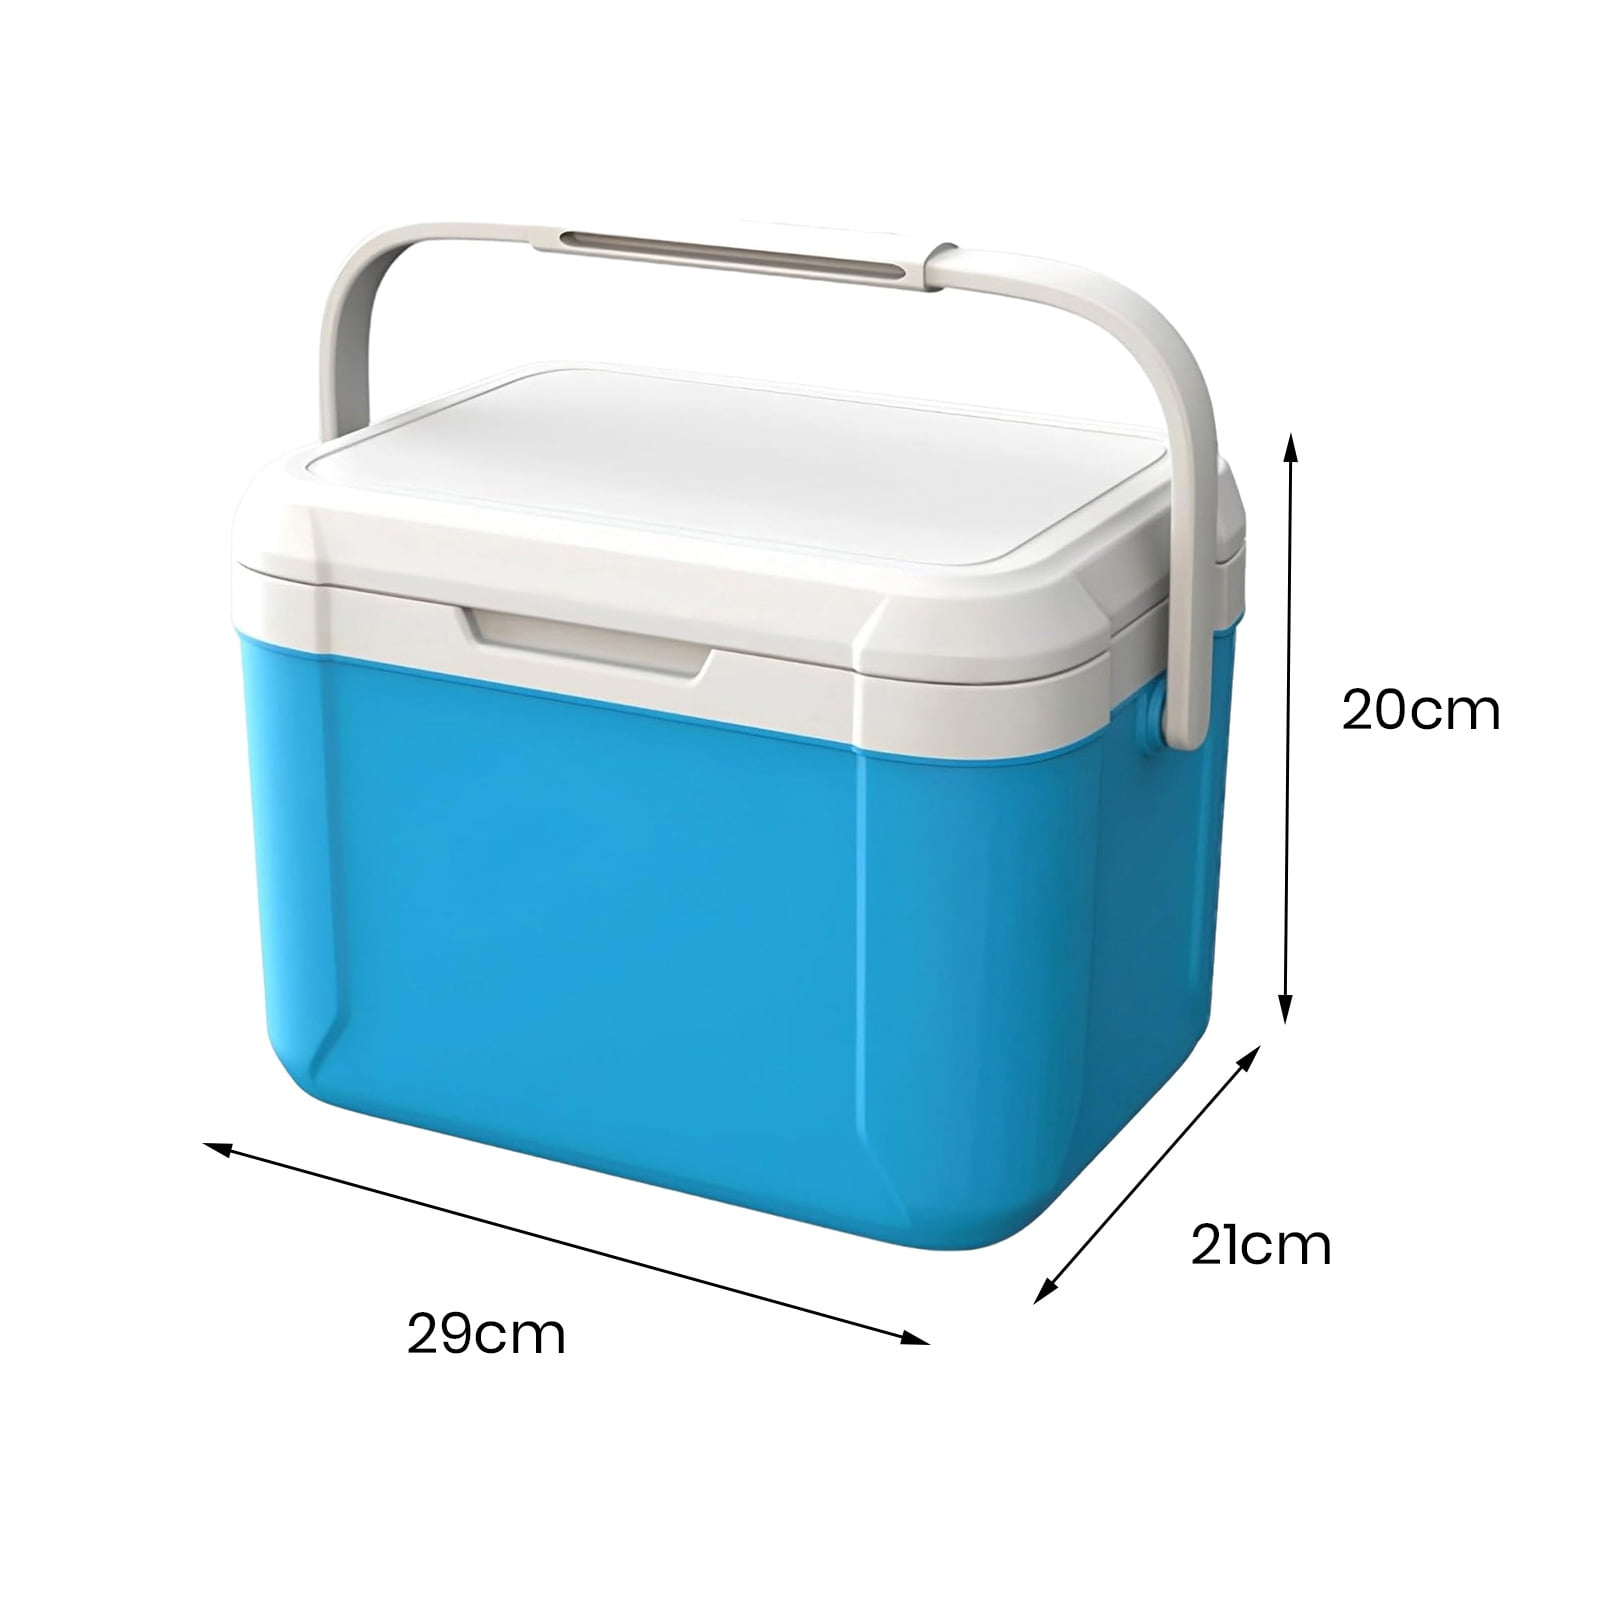 HiGropcore 6 Quart Small Cooler - Portable Hard Shell Cooler Lunch Box -  Ice Retention Insulated Camping Cooler LS6-02